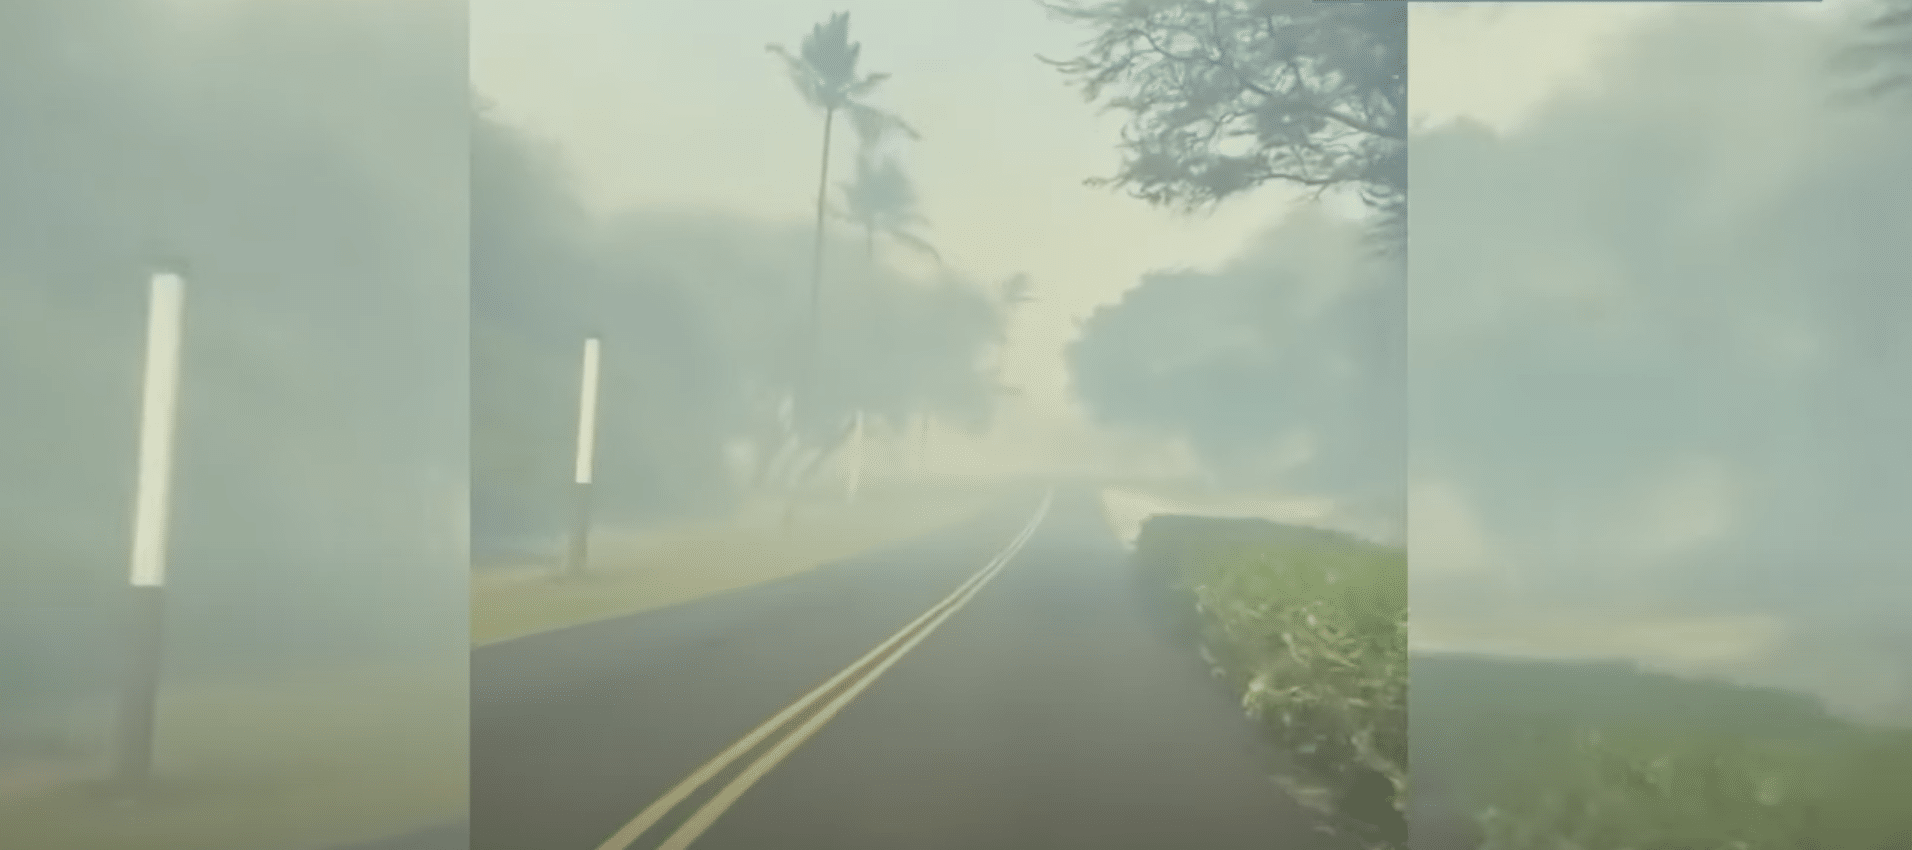 DEVELOPING: Deadly wildfires in Maui force many to flee into the ocean in Hawaii